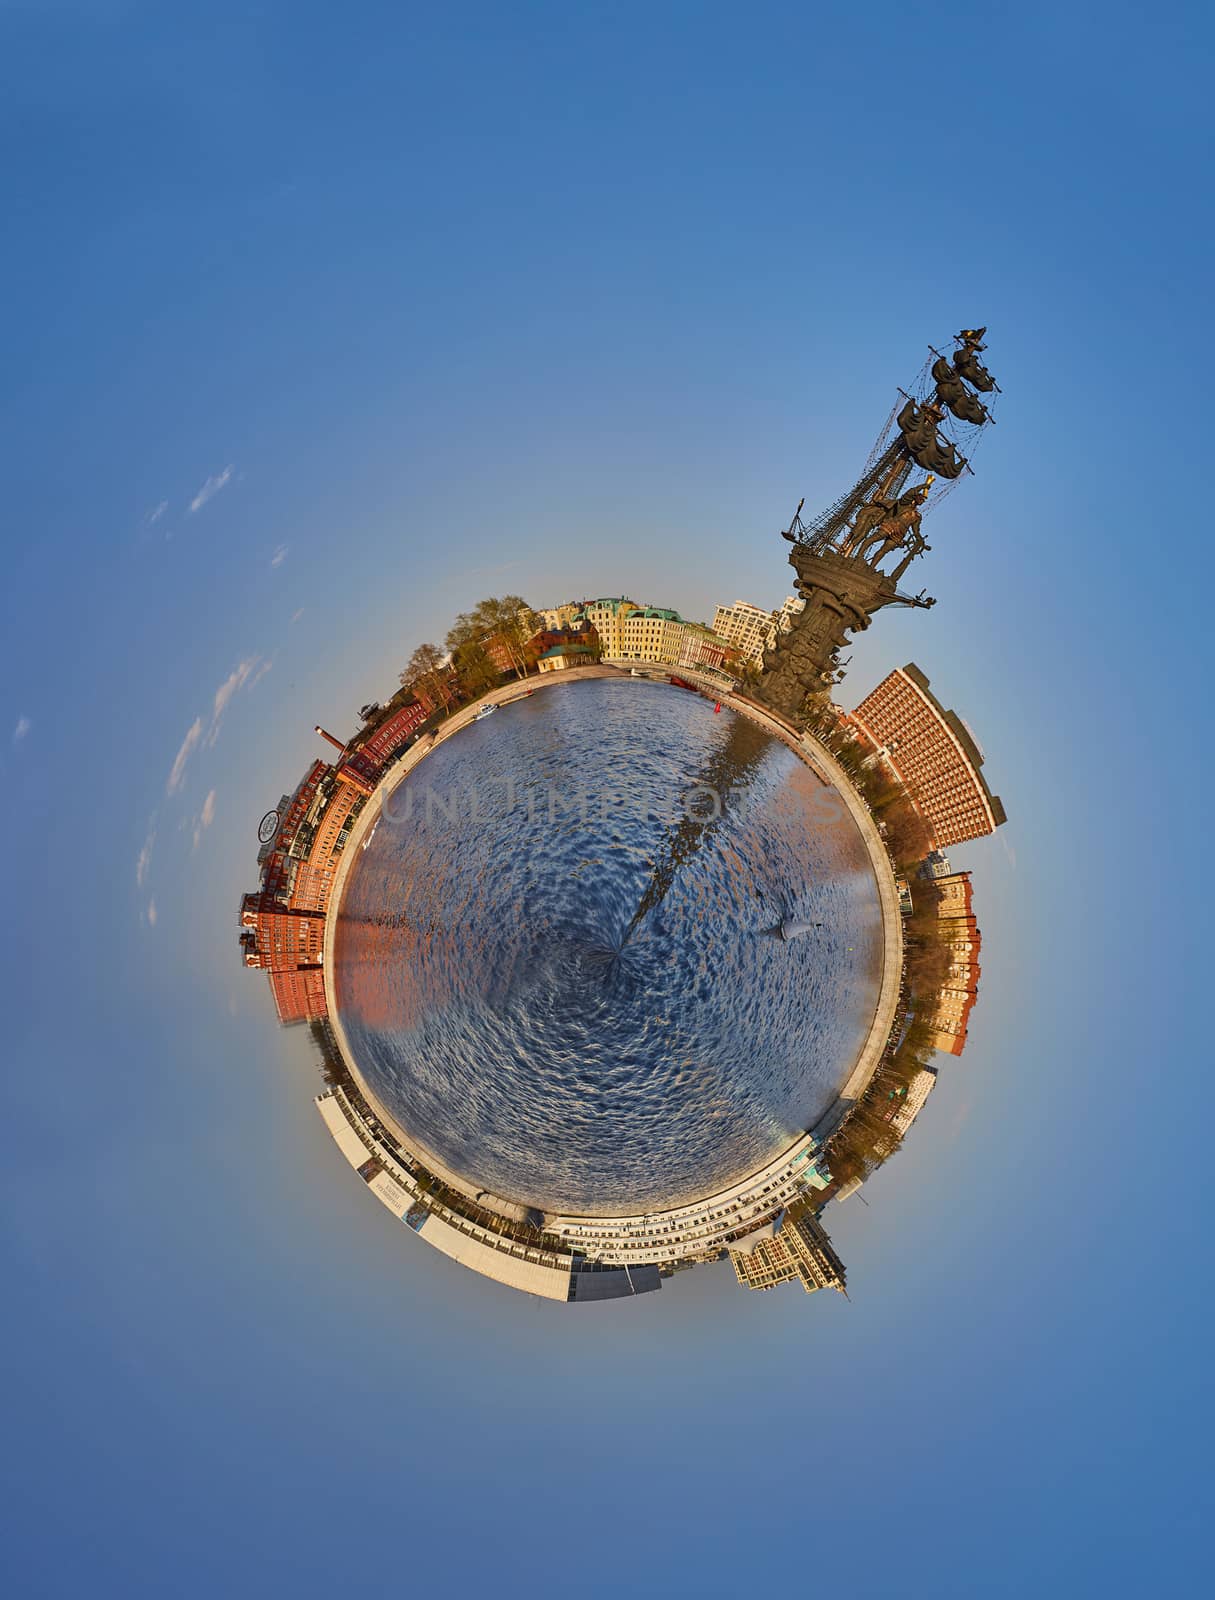 Small planet - Moscow river with Peter the great monument